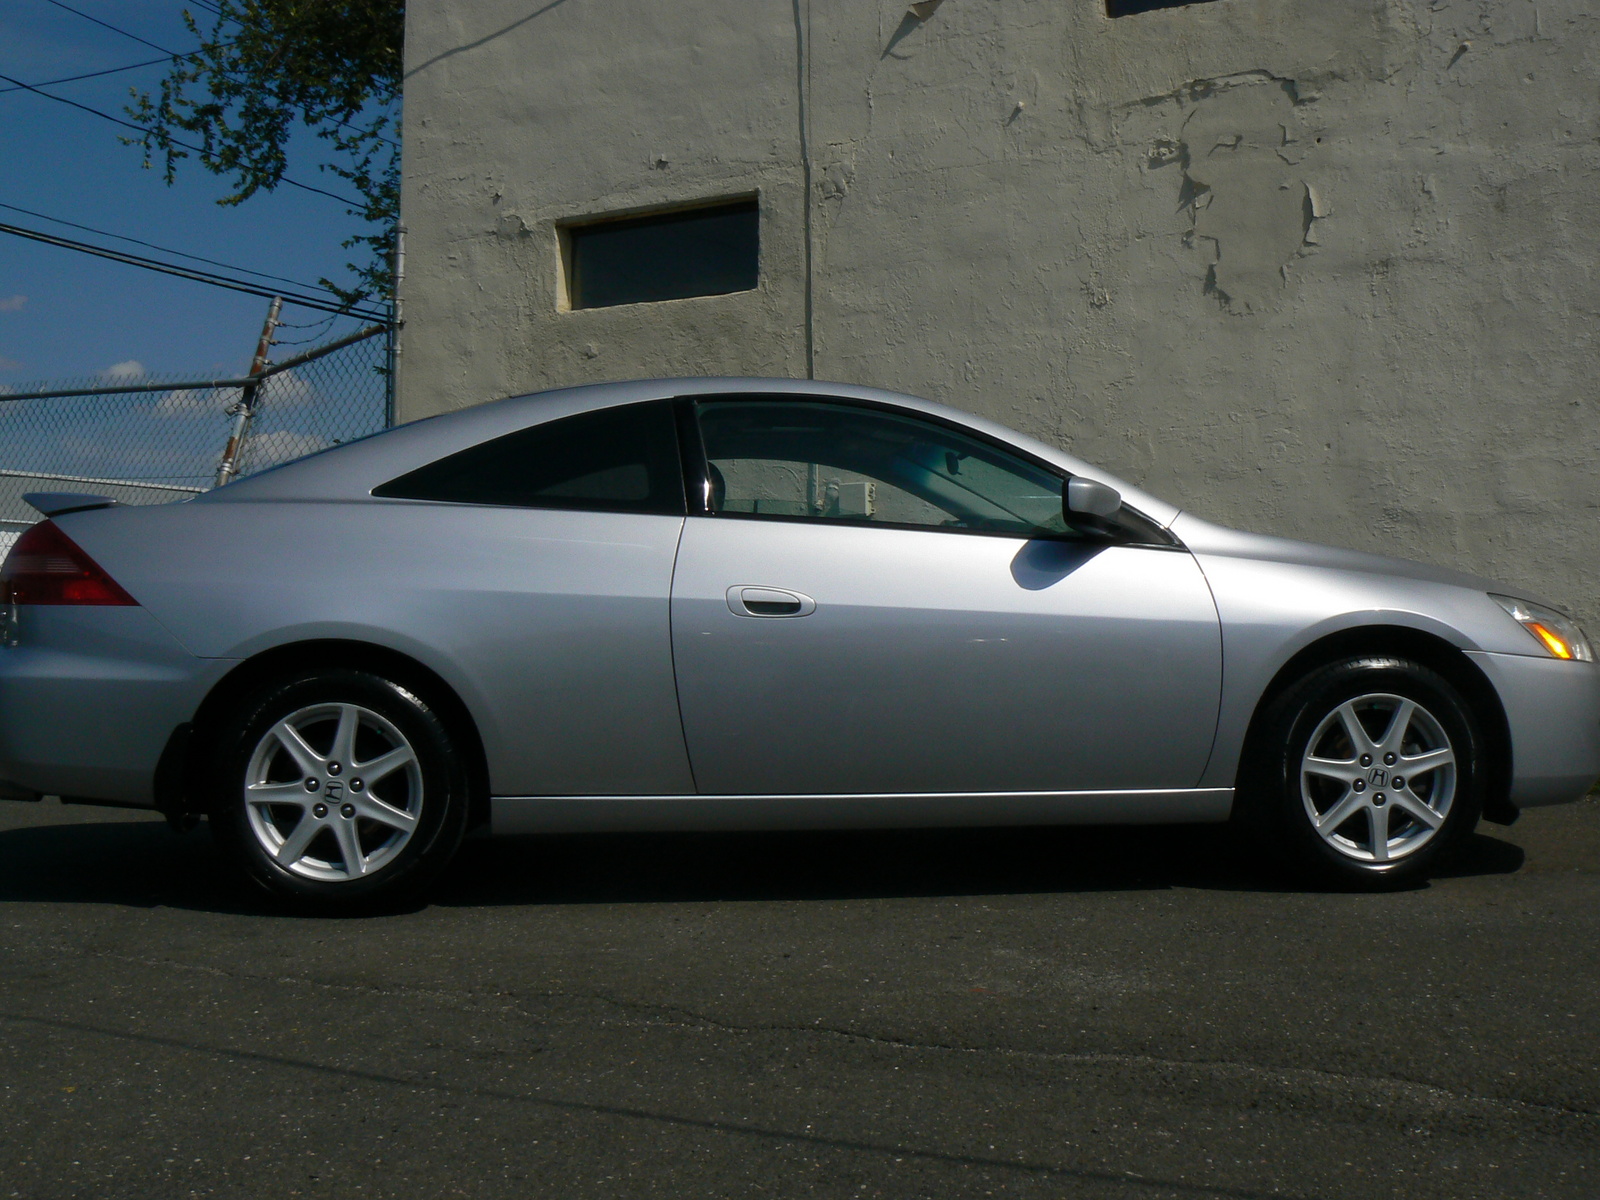 2003 Honda accord ex coupe review #3